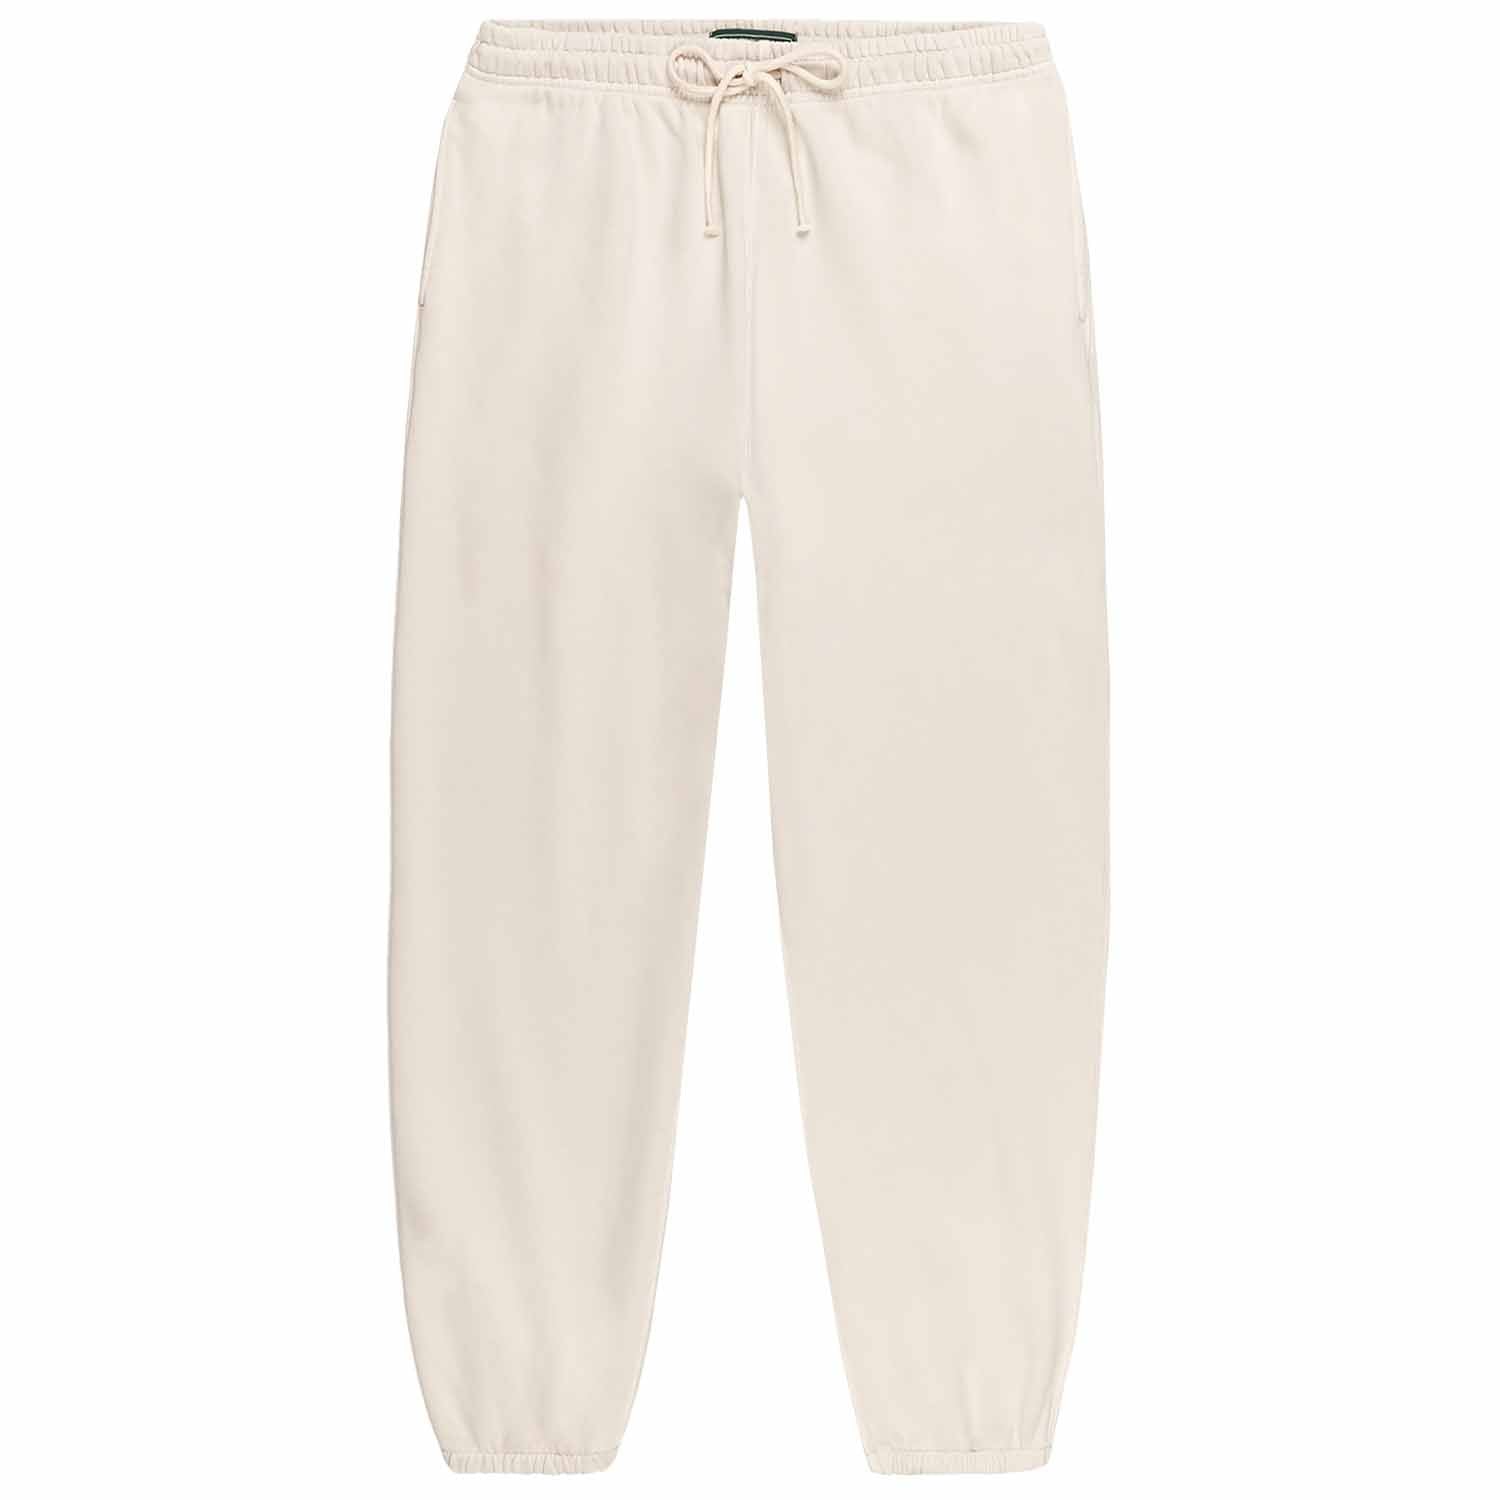 Polo Ralph Lauren x Element Sweatpants in cream with draw string and elastic in ankles.